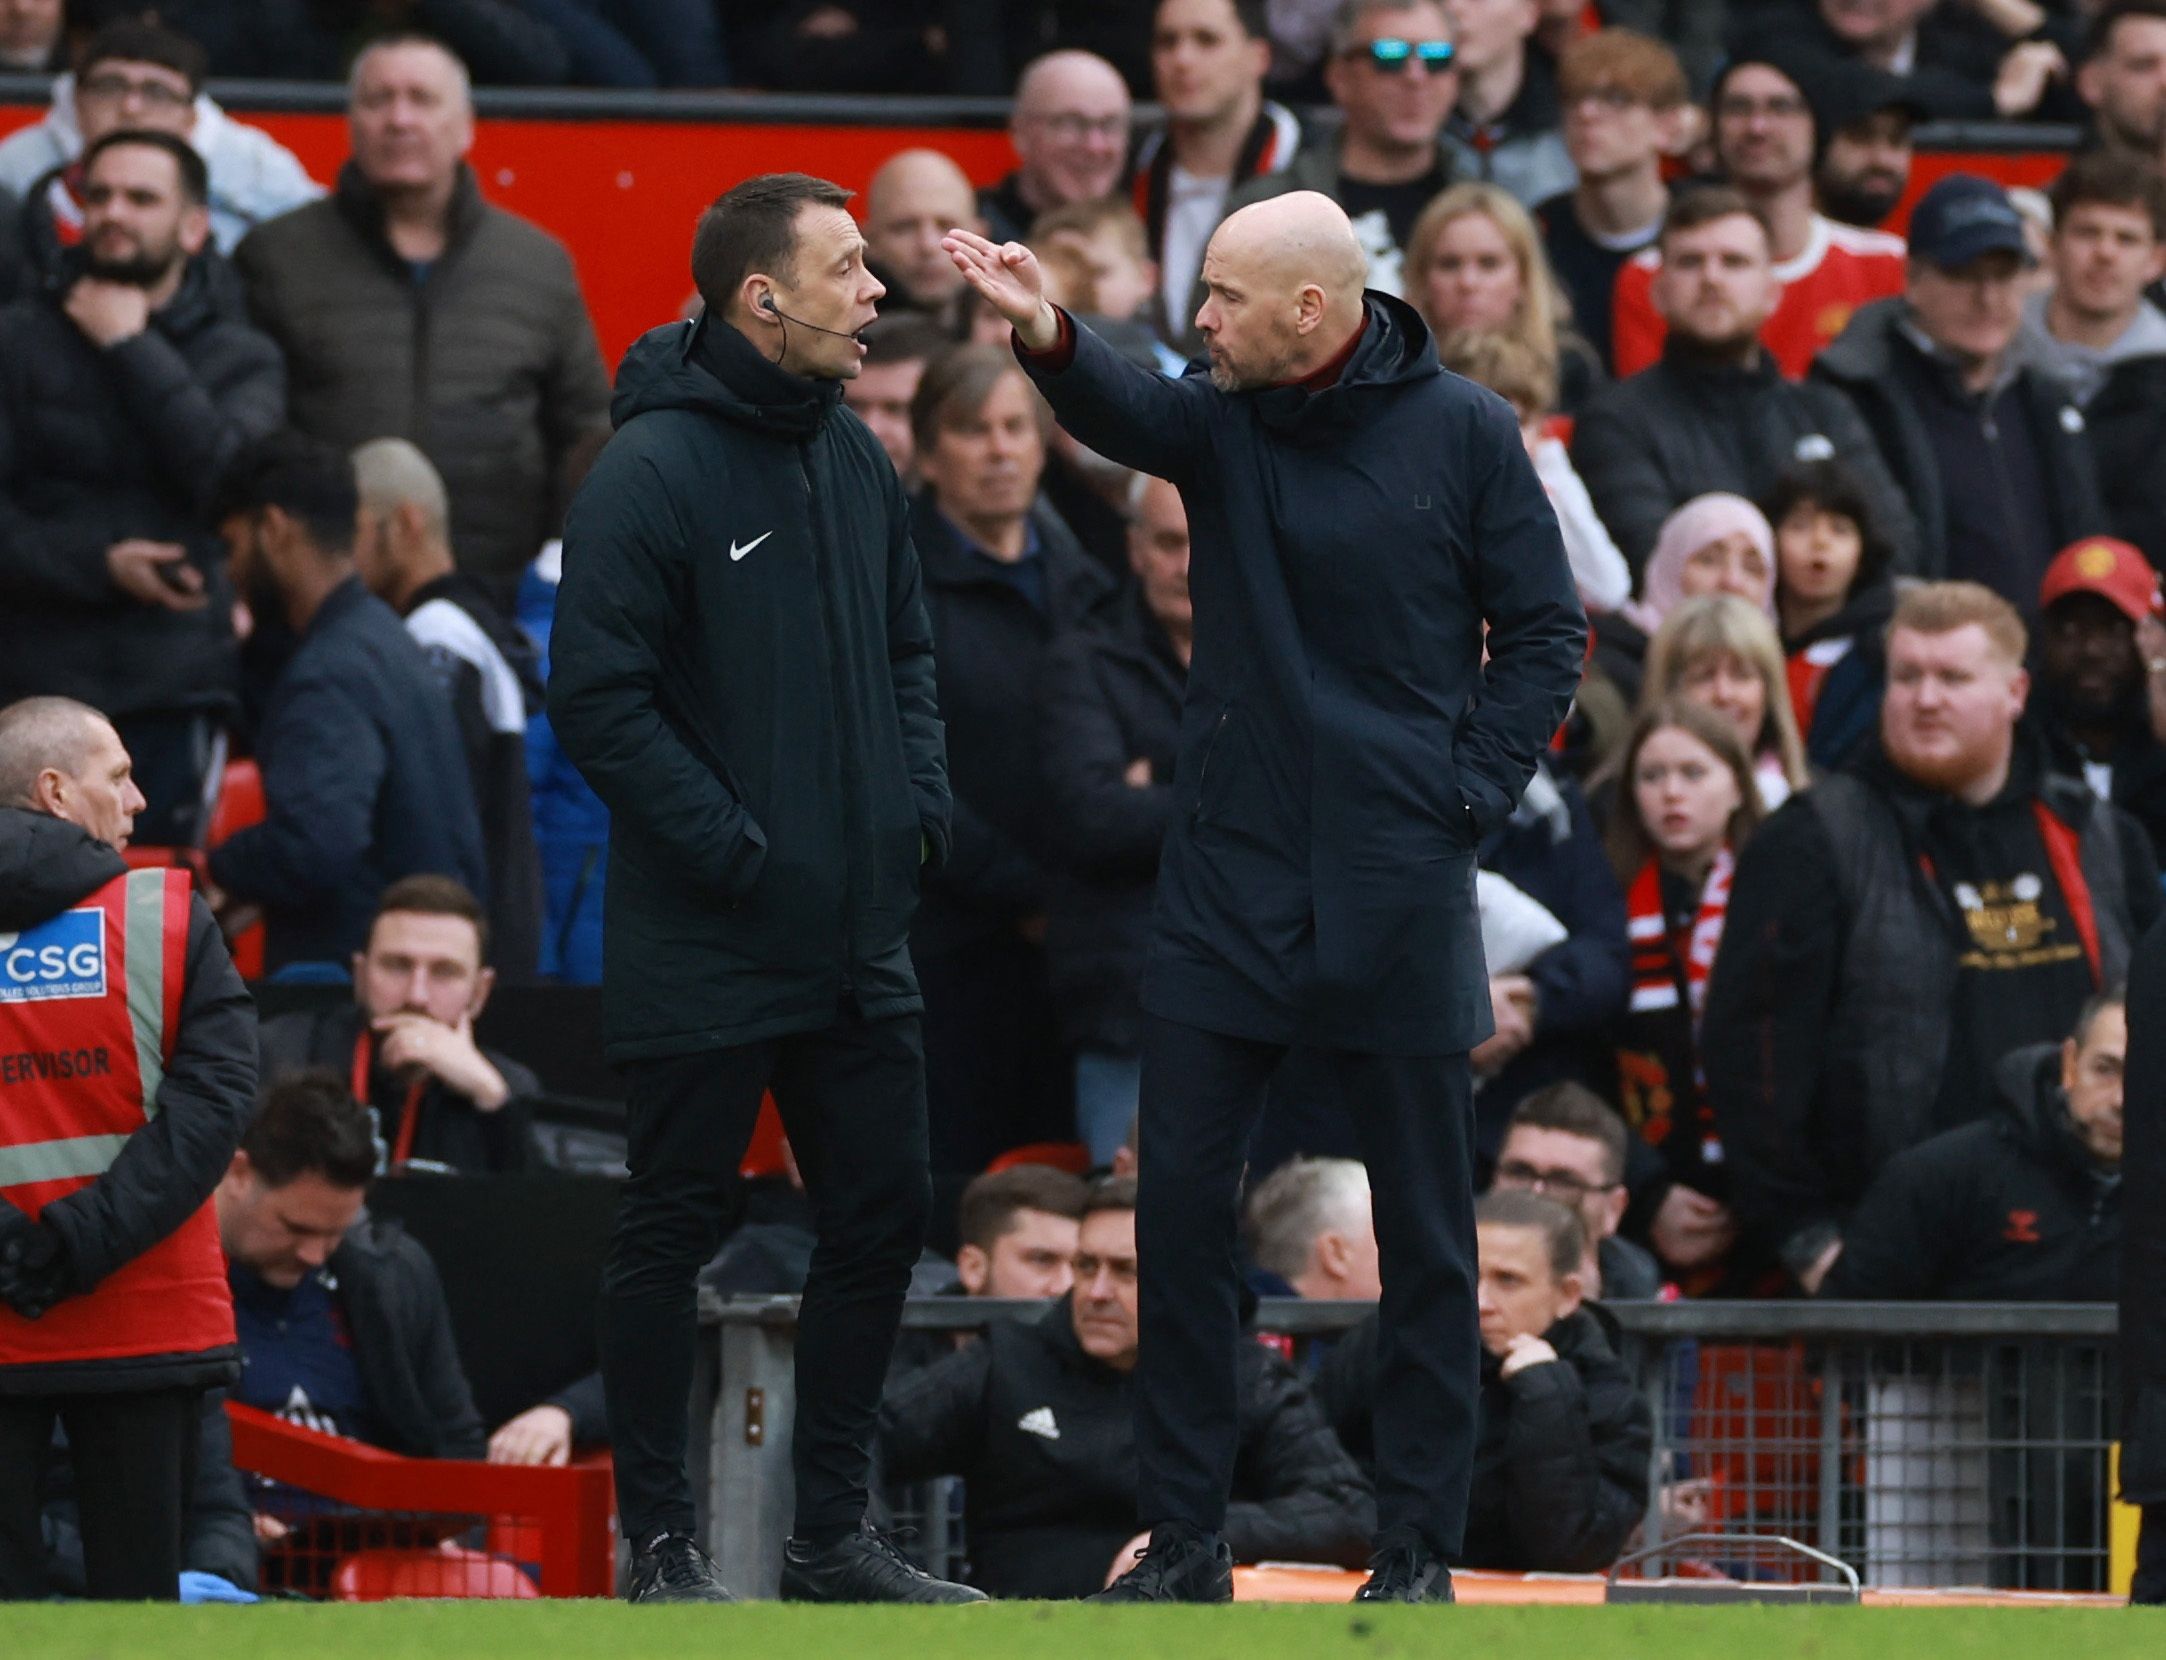 Manchester United manager Erik ten Hag remonstrates with the fourth official